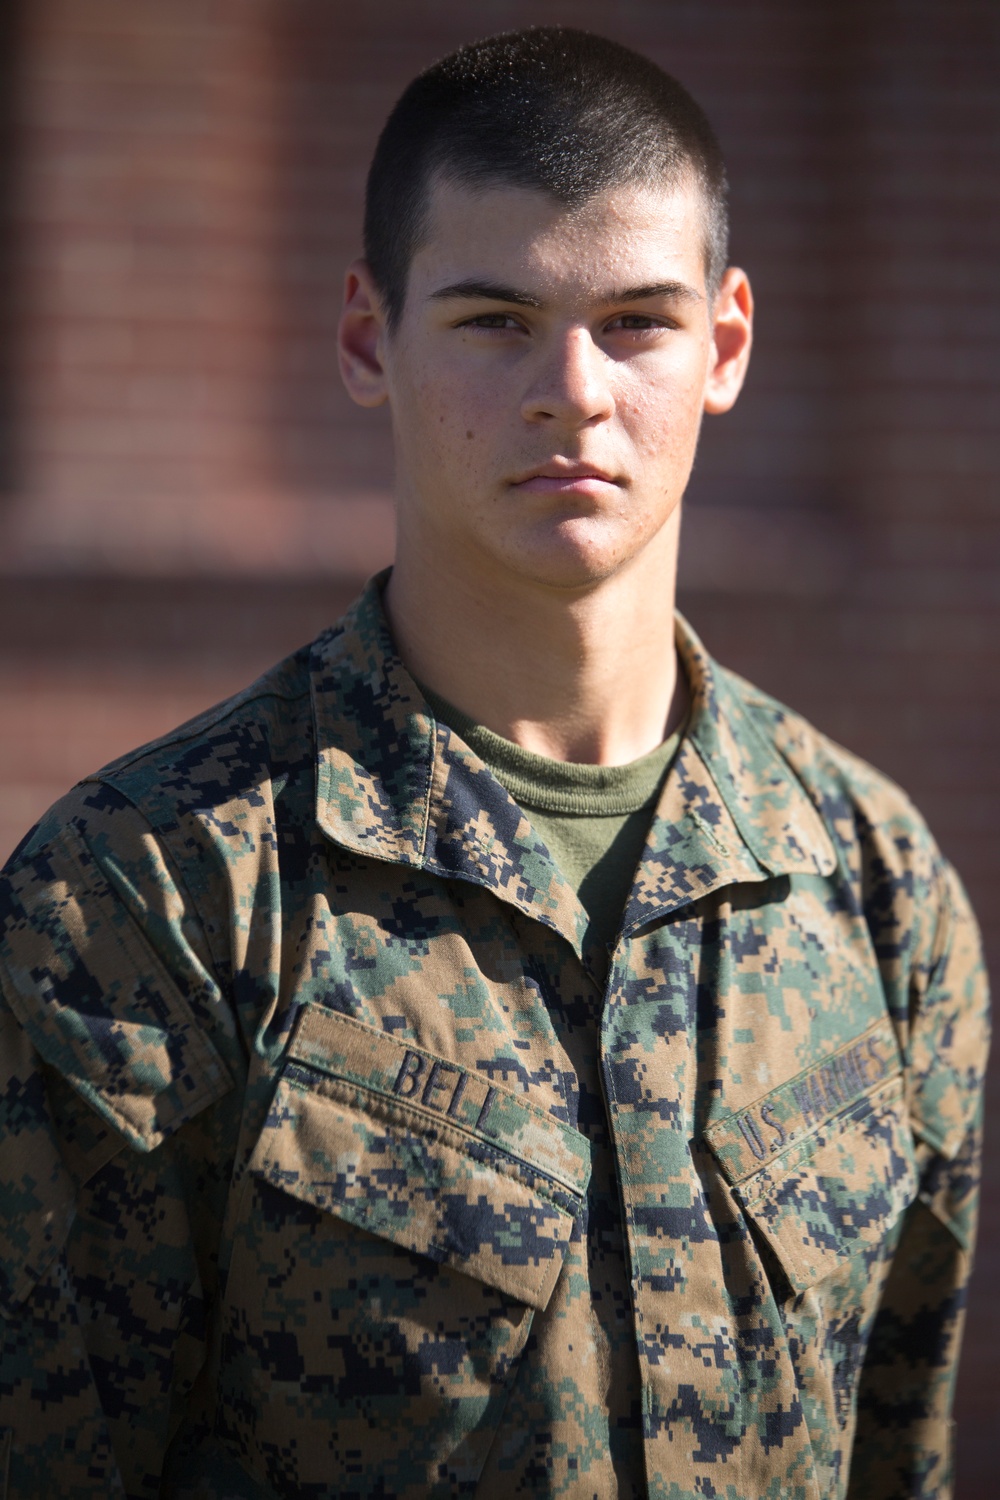 Taylor Mill, Ky., native training at Parris Island to become U.S. Marine